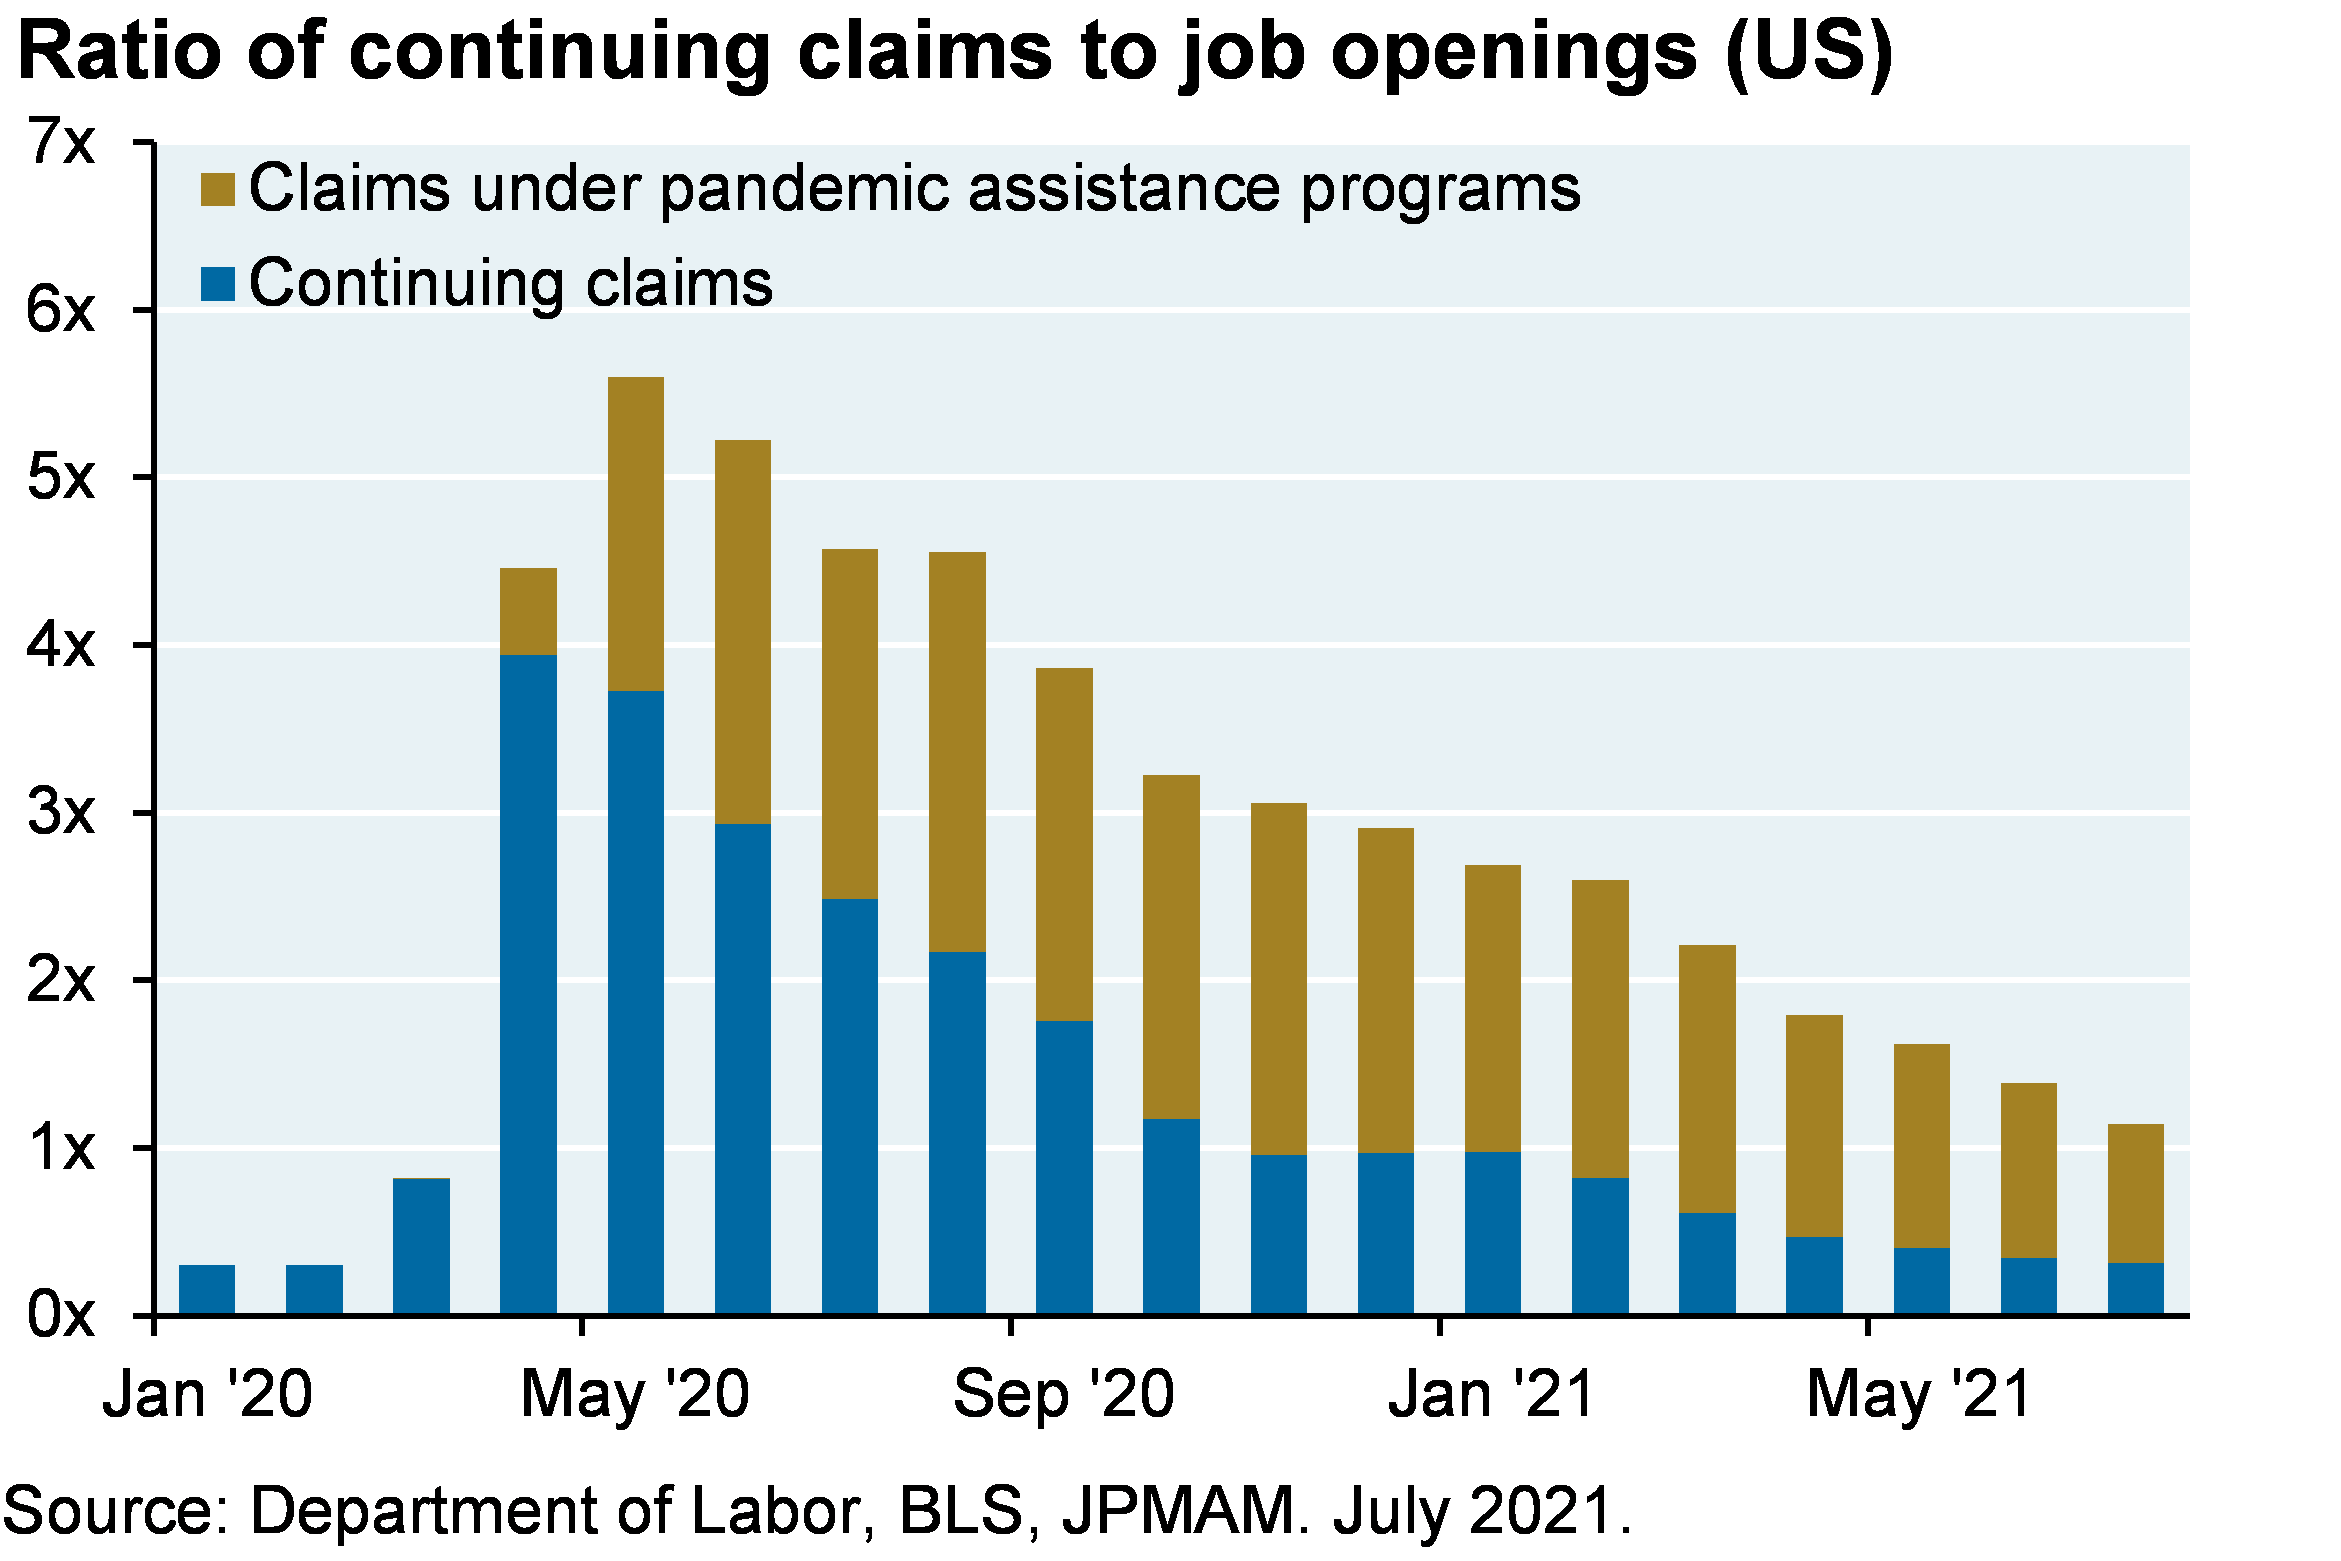  Stacked bar chart shows the ratio of continuing claims to job openings since the beginning of 2021. The chart breaks down all claims into two categories: claims under pandemic assistance programs and all other. The chart shows that 2/3 of those showing up in continuing claims are receiving some form of pandemic unemployment assistance.